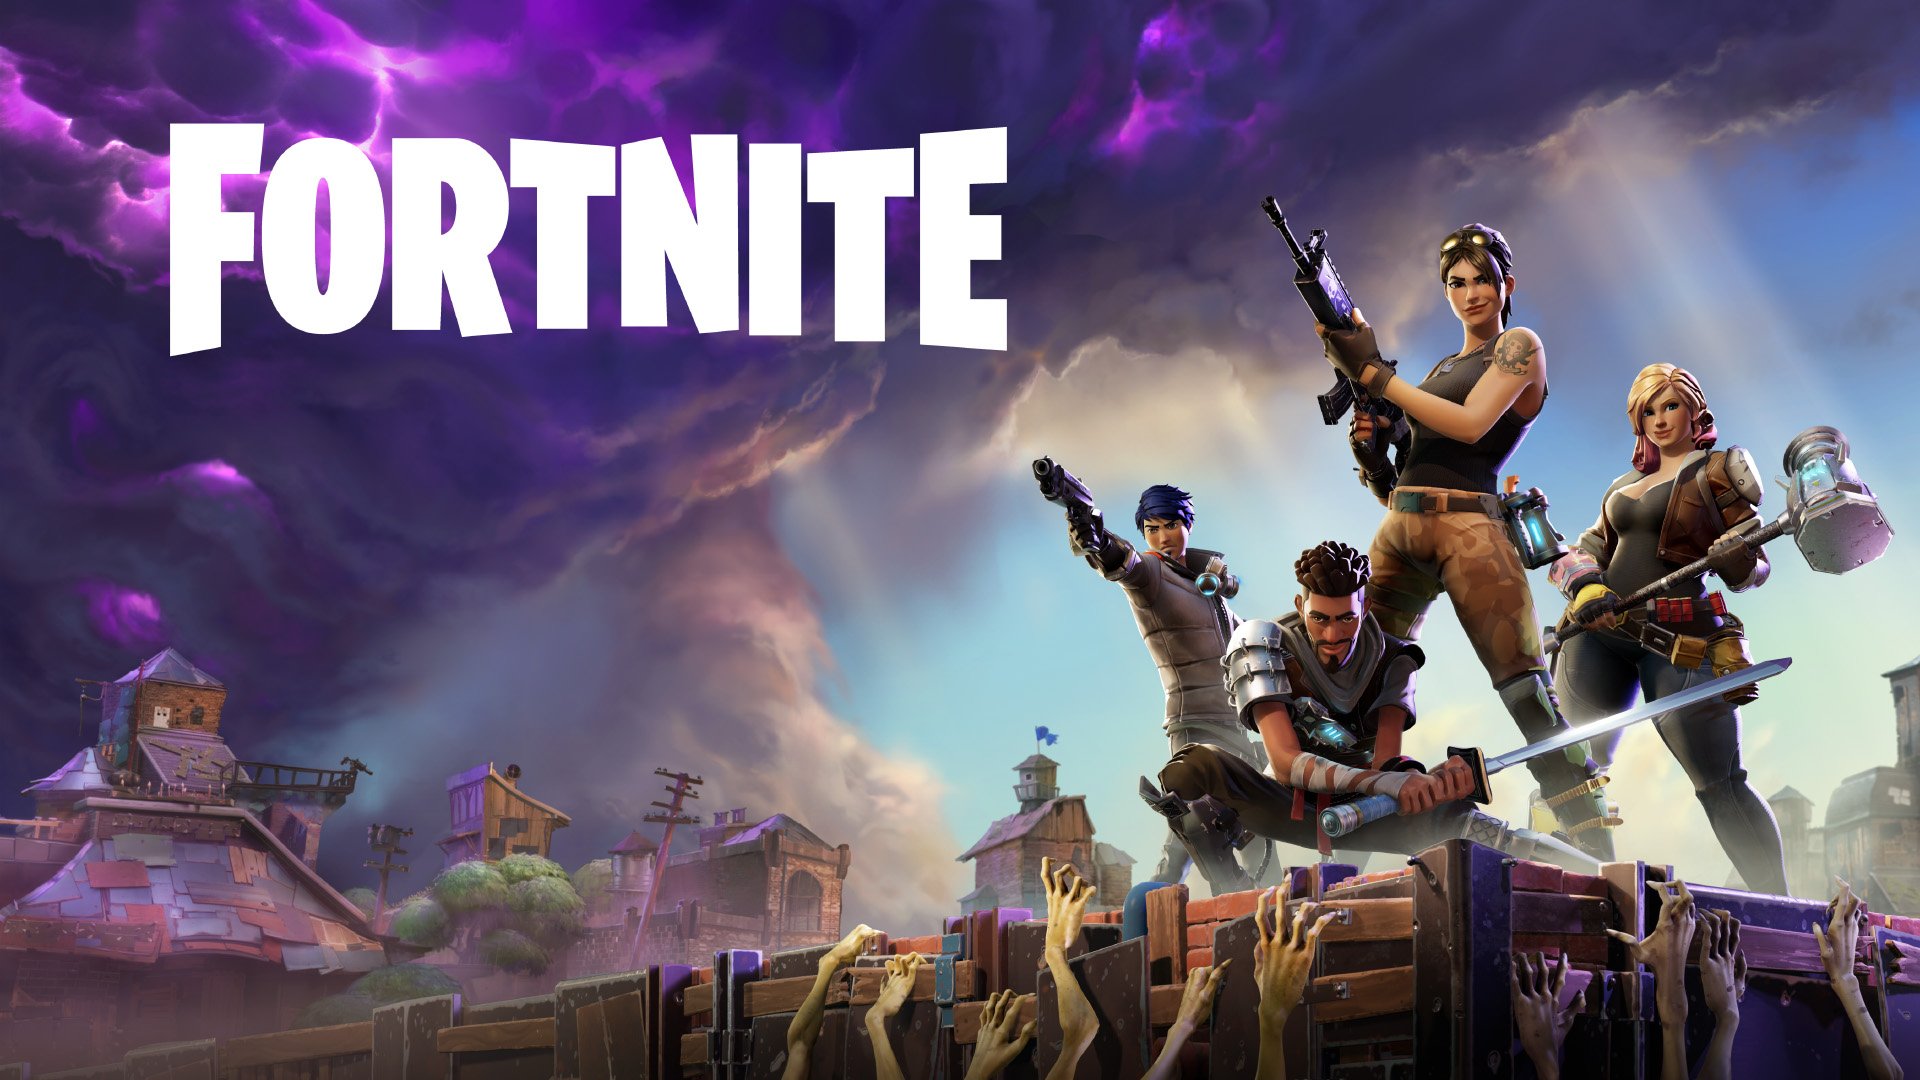 farmaceut Lull liter Do you need a PS Plus or Xbox Live Gold to play Fortnite? - Dot Esports